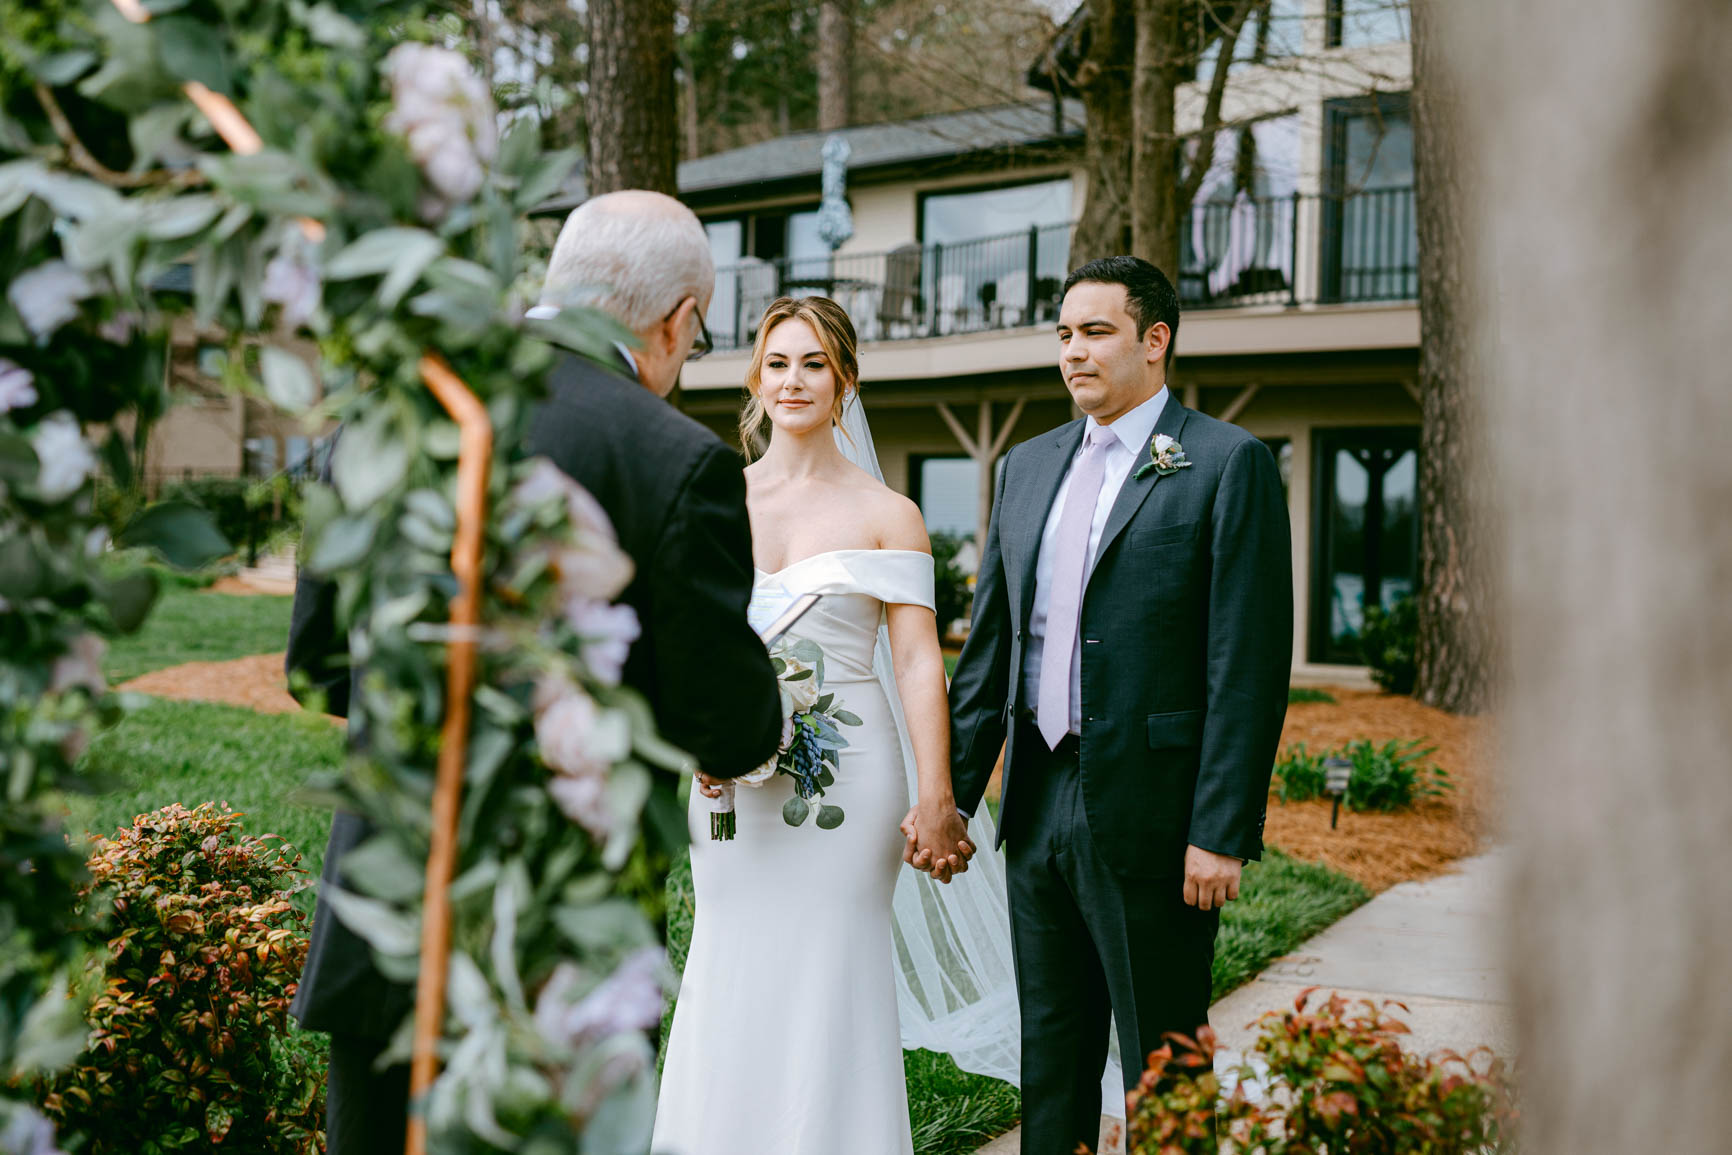 elopement ceremony in Mooresville, NC lake house shot by Nhieu Tang Photography | nhieutang.com